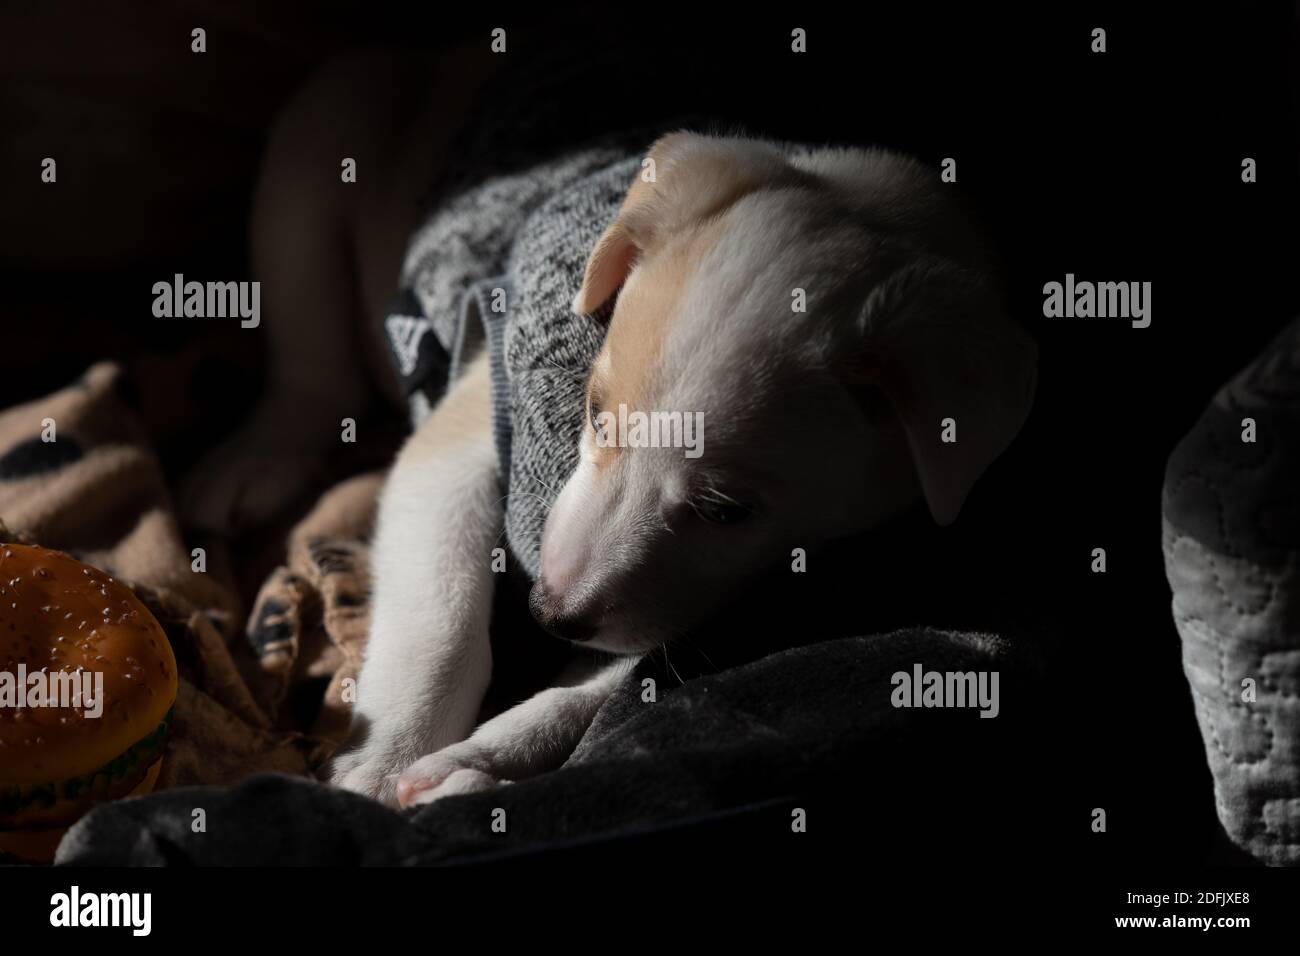 Dark portrait of a young female puppy wearing a sweater at home Stock Photo